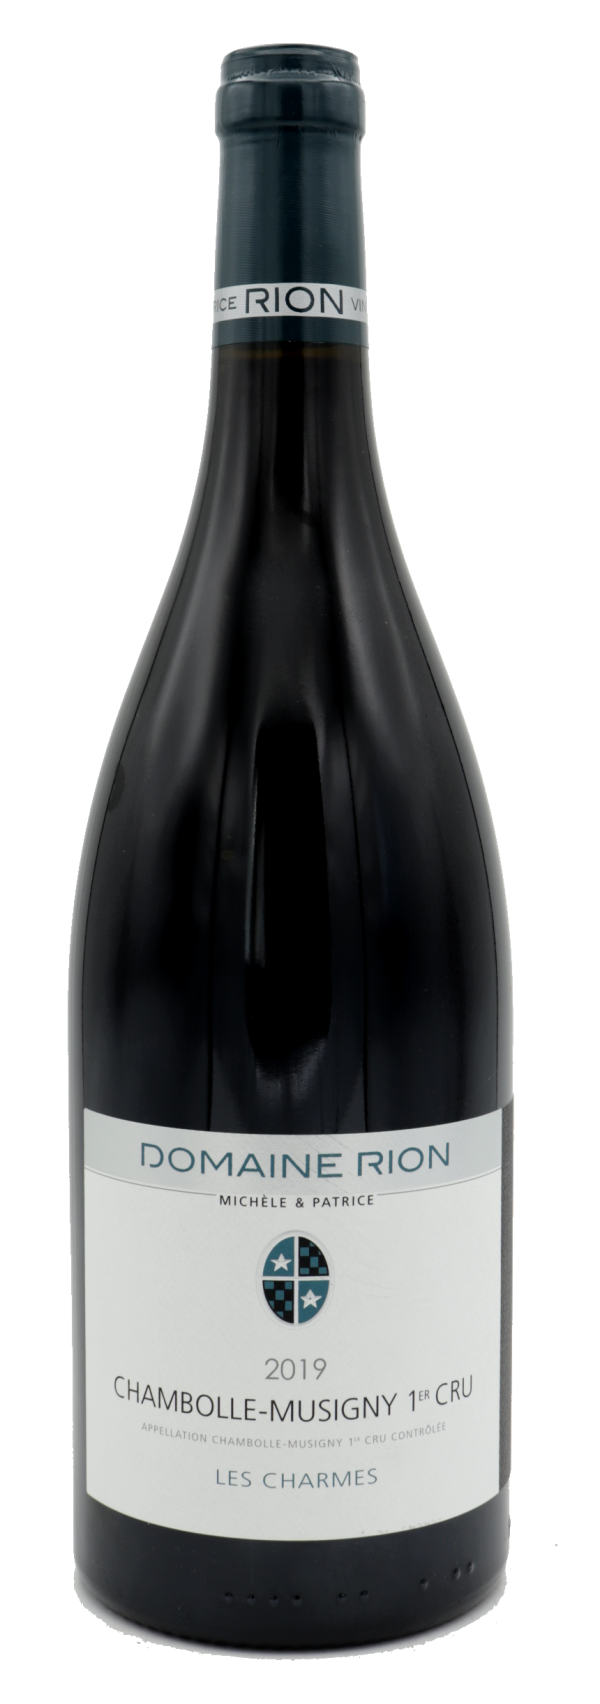 Domaine Michele   Patrice Rion, Chambolle-Musigny 1er Cru Les Charmes 2019